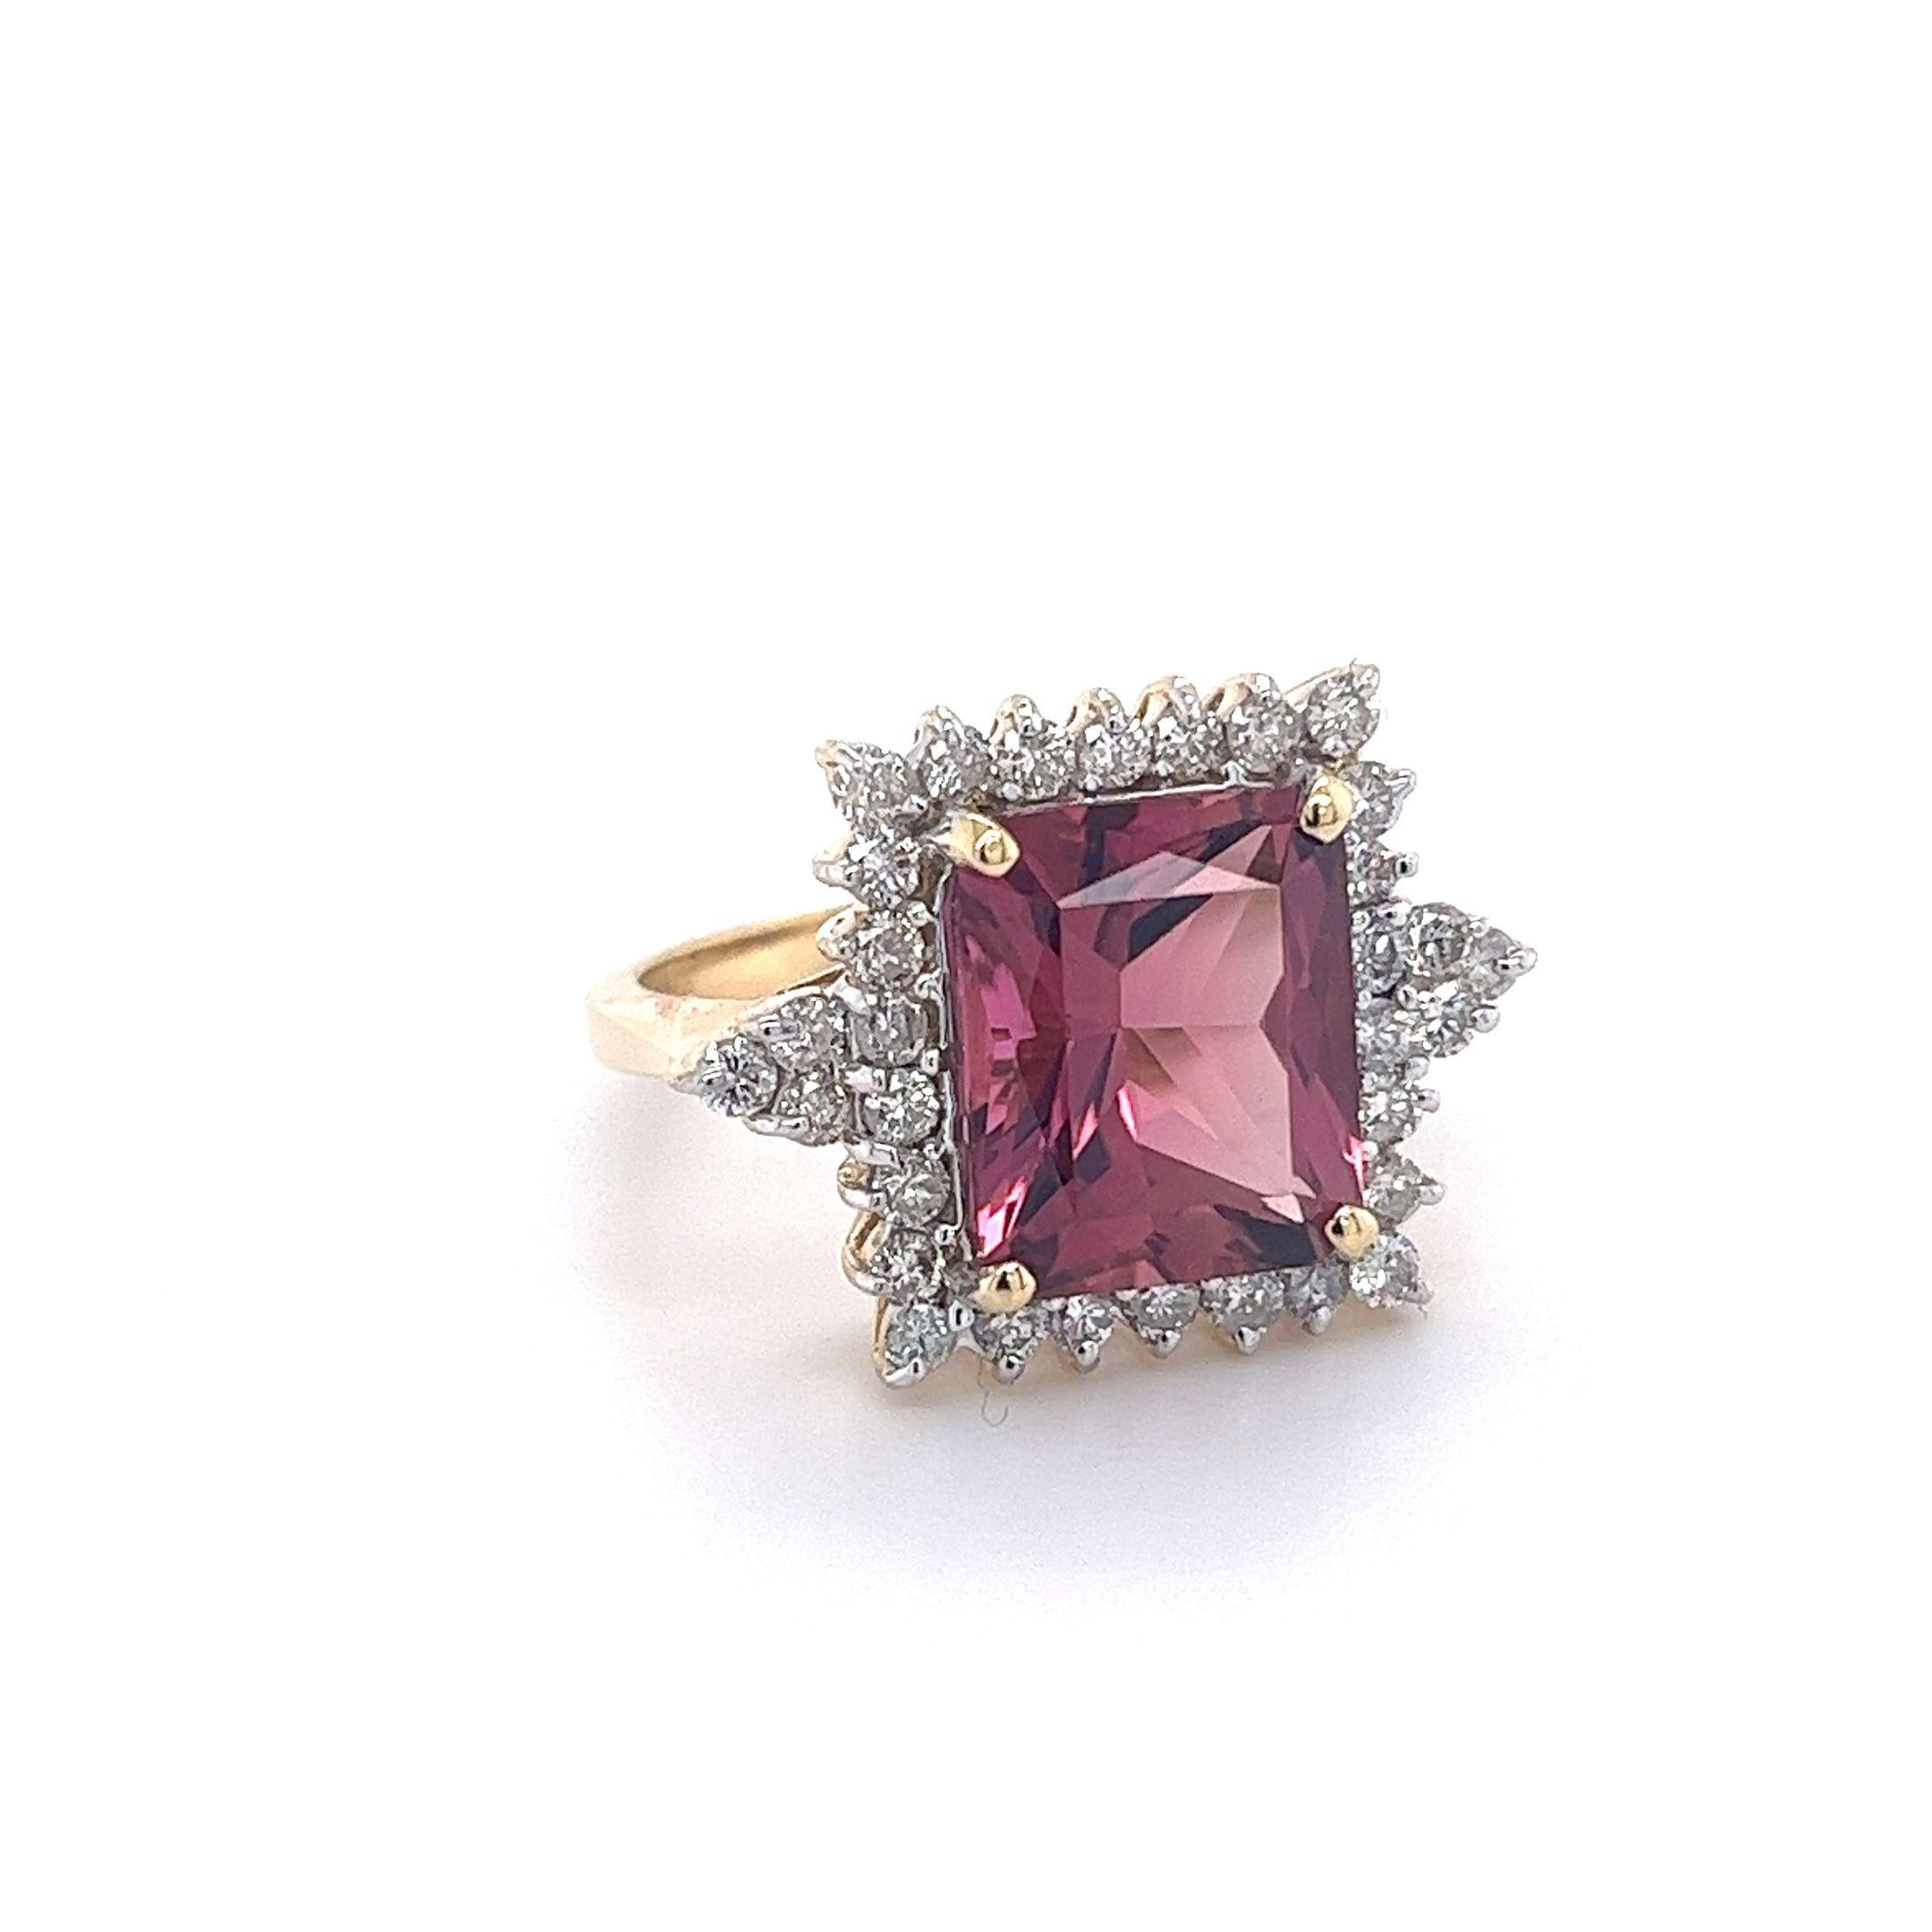 Natural Vivid Pink 7 Carat Radiant Cut Tourmaline Ring With Diamonds in 18K Gold In New Condition For Sale In Miami, FL